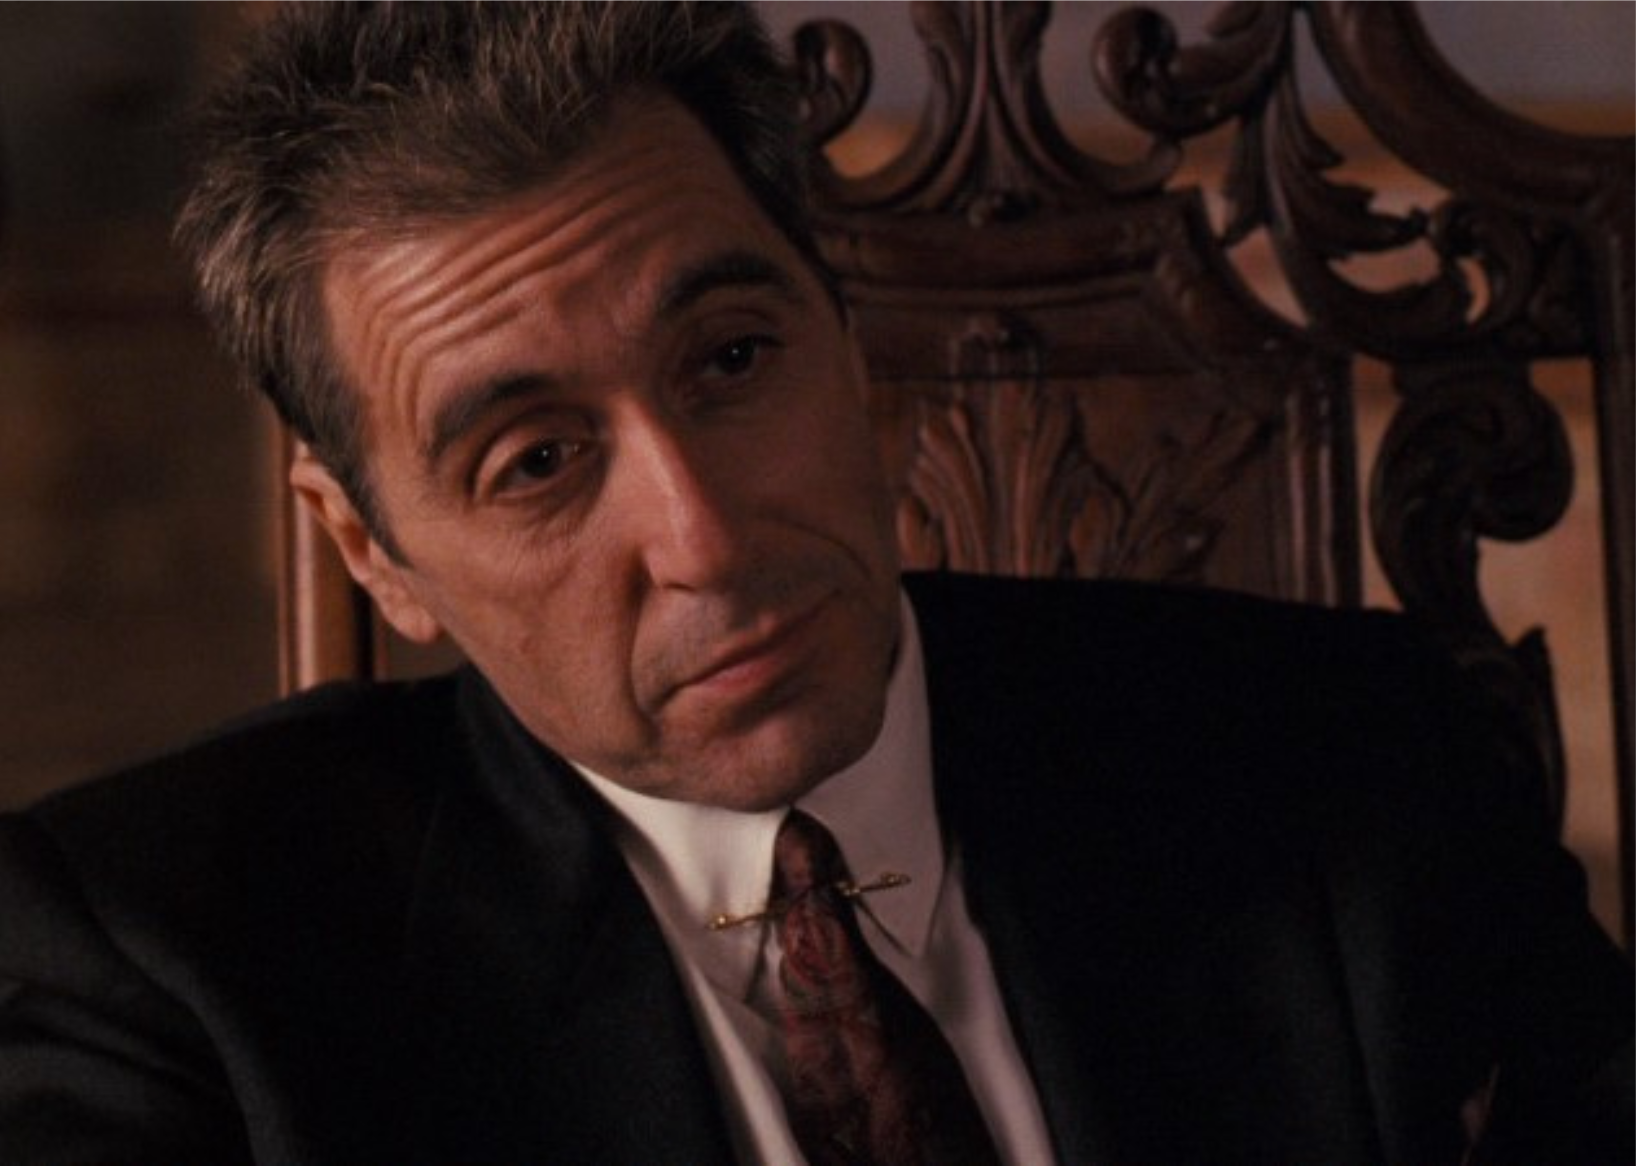 Al Pacino in a scene from 'The Godfather: Part III’.